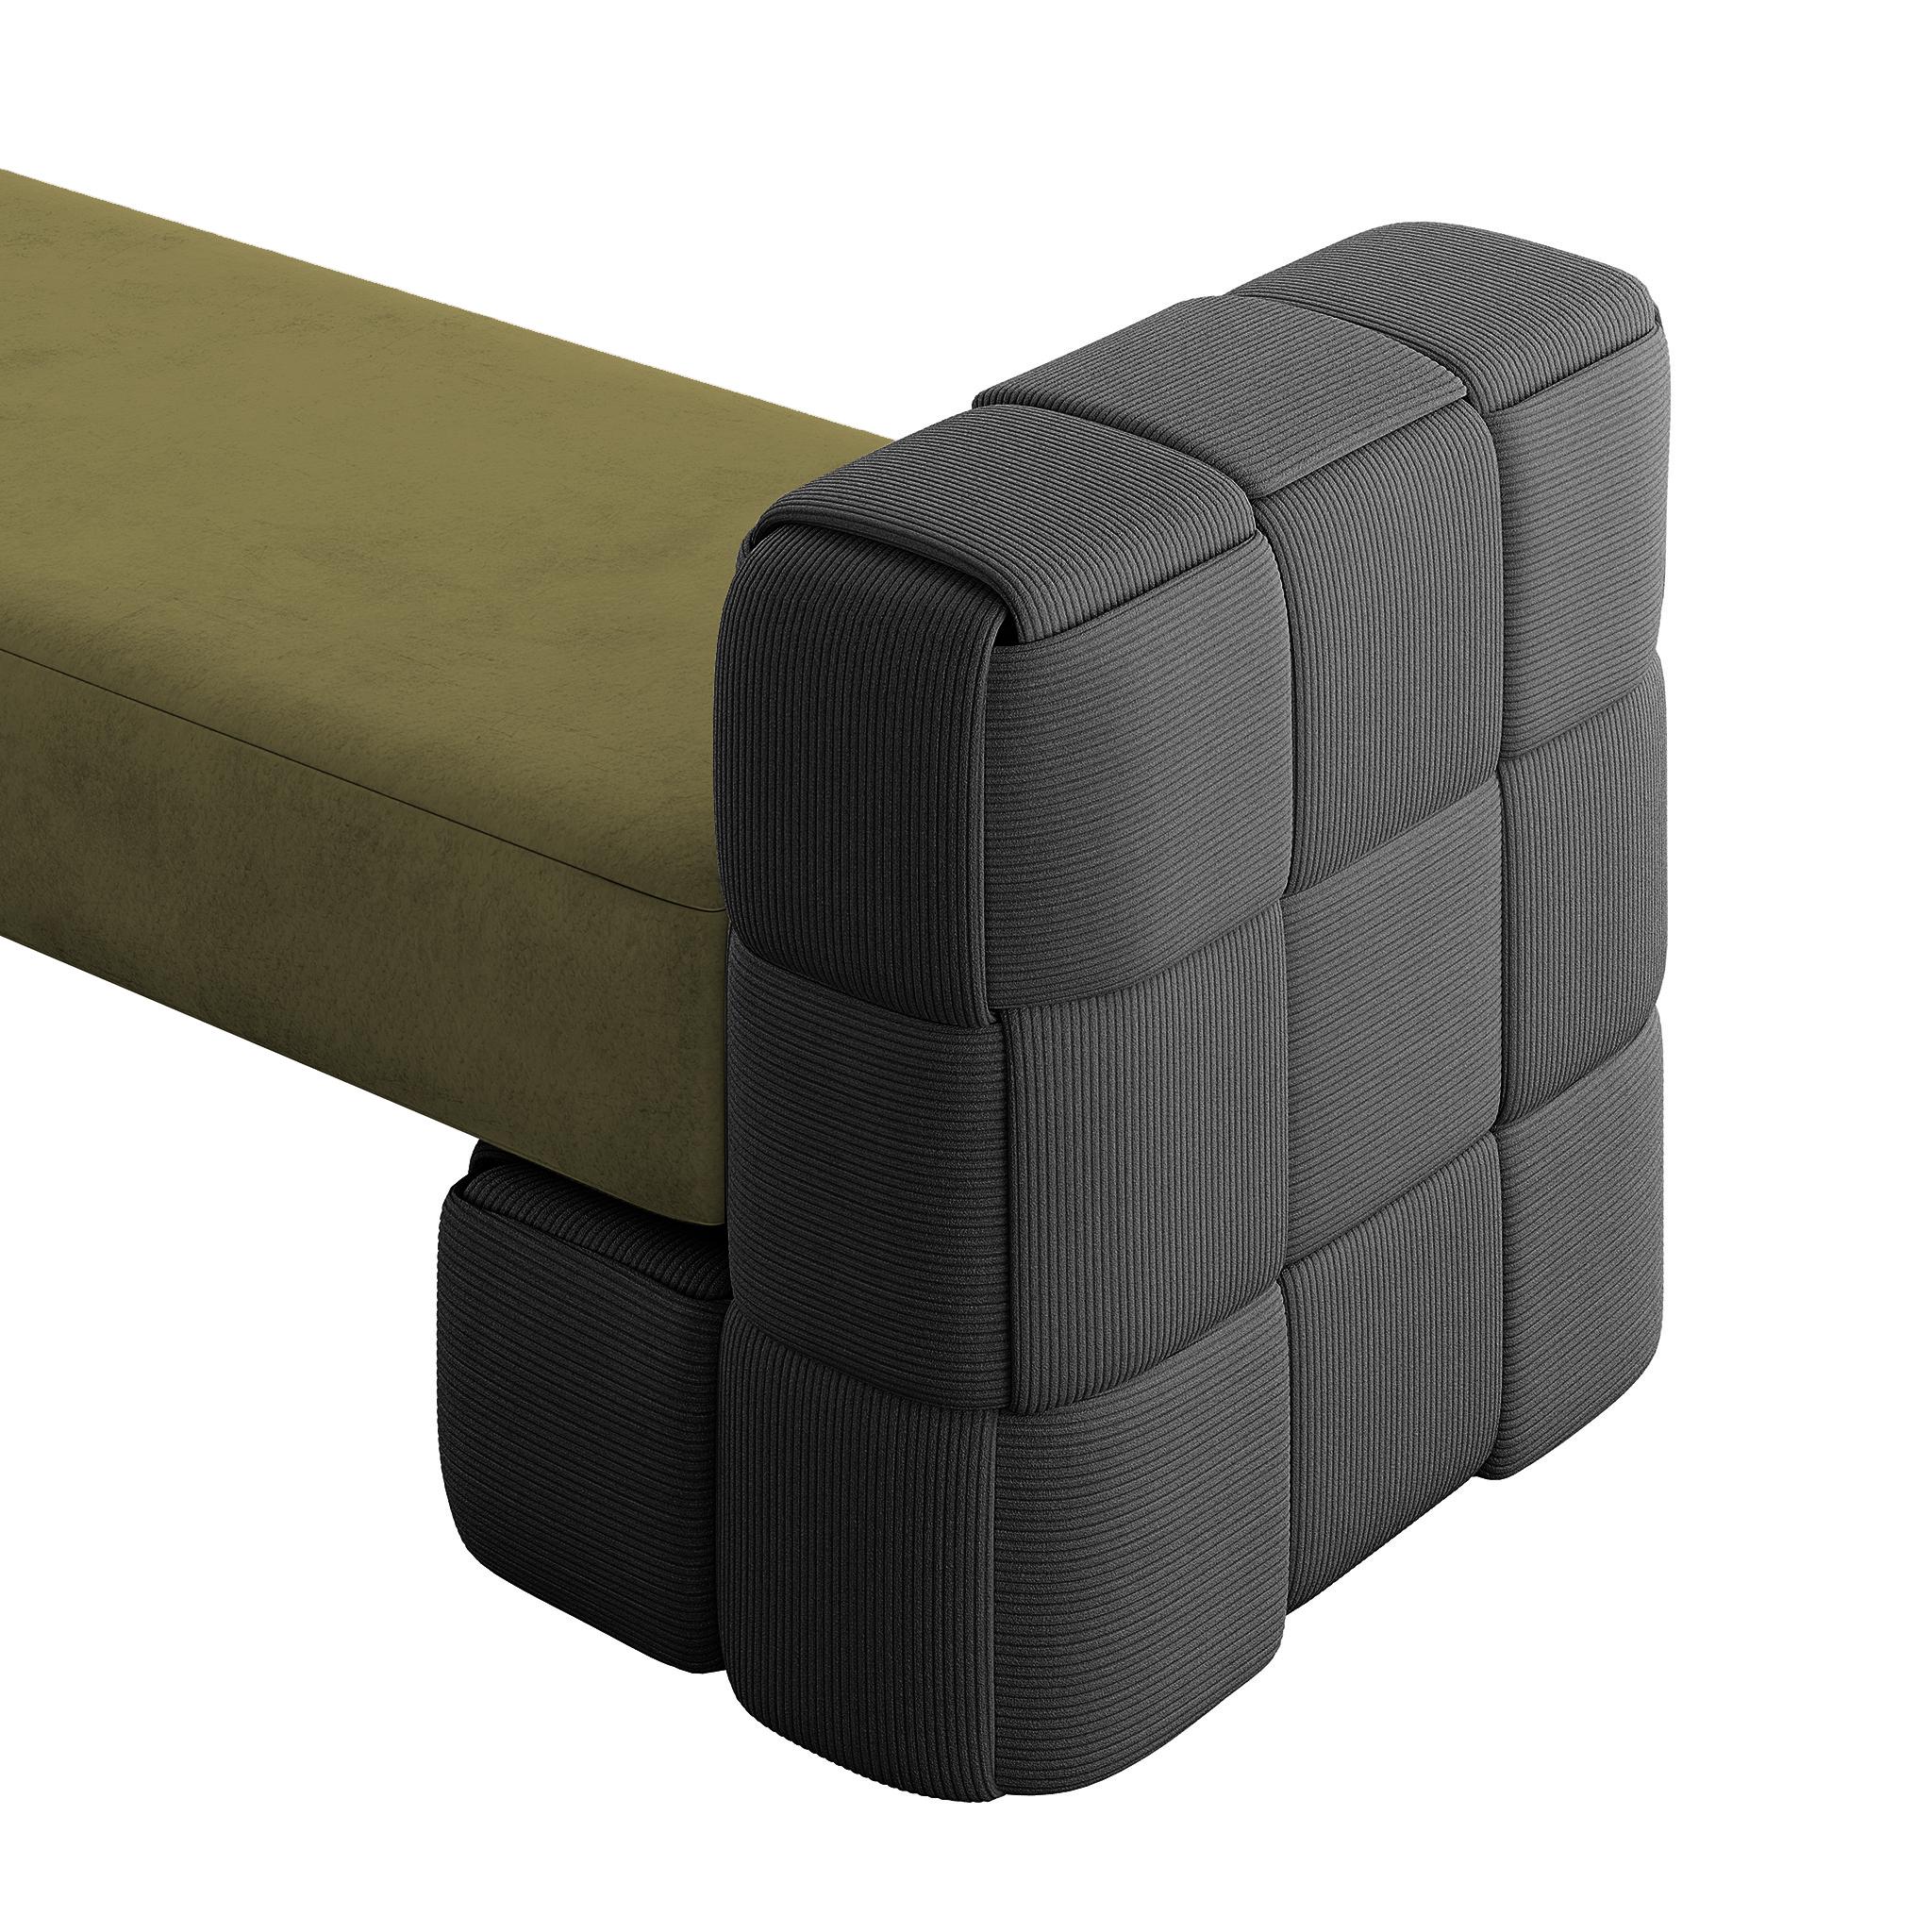 Contemporary Woven Upholstered Bench Forest Green Suede & Arms Black Corduroy (Organische Moderne) im Angebot